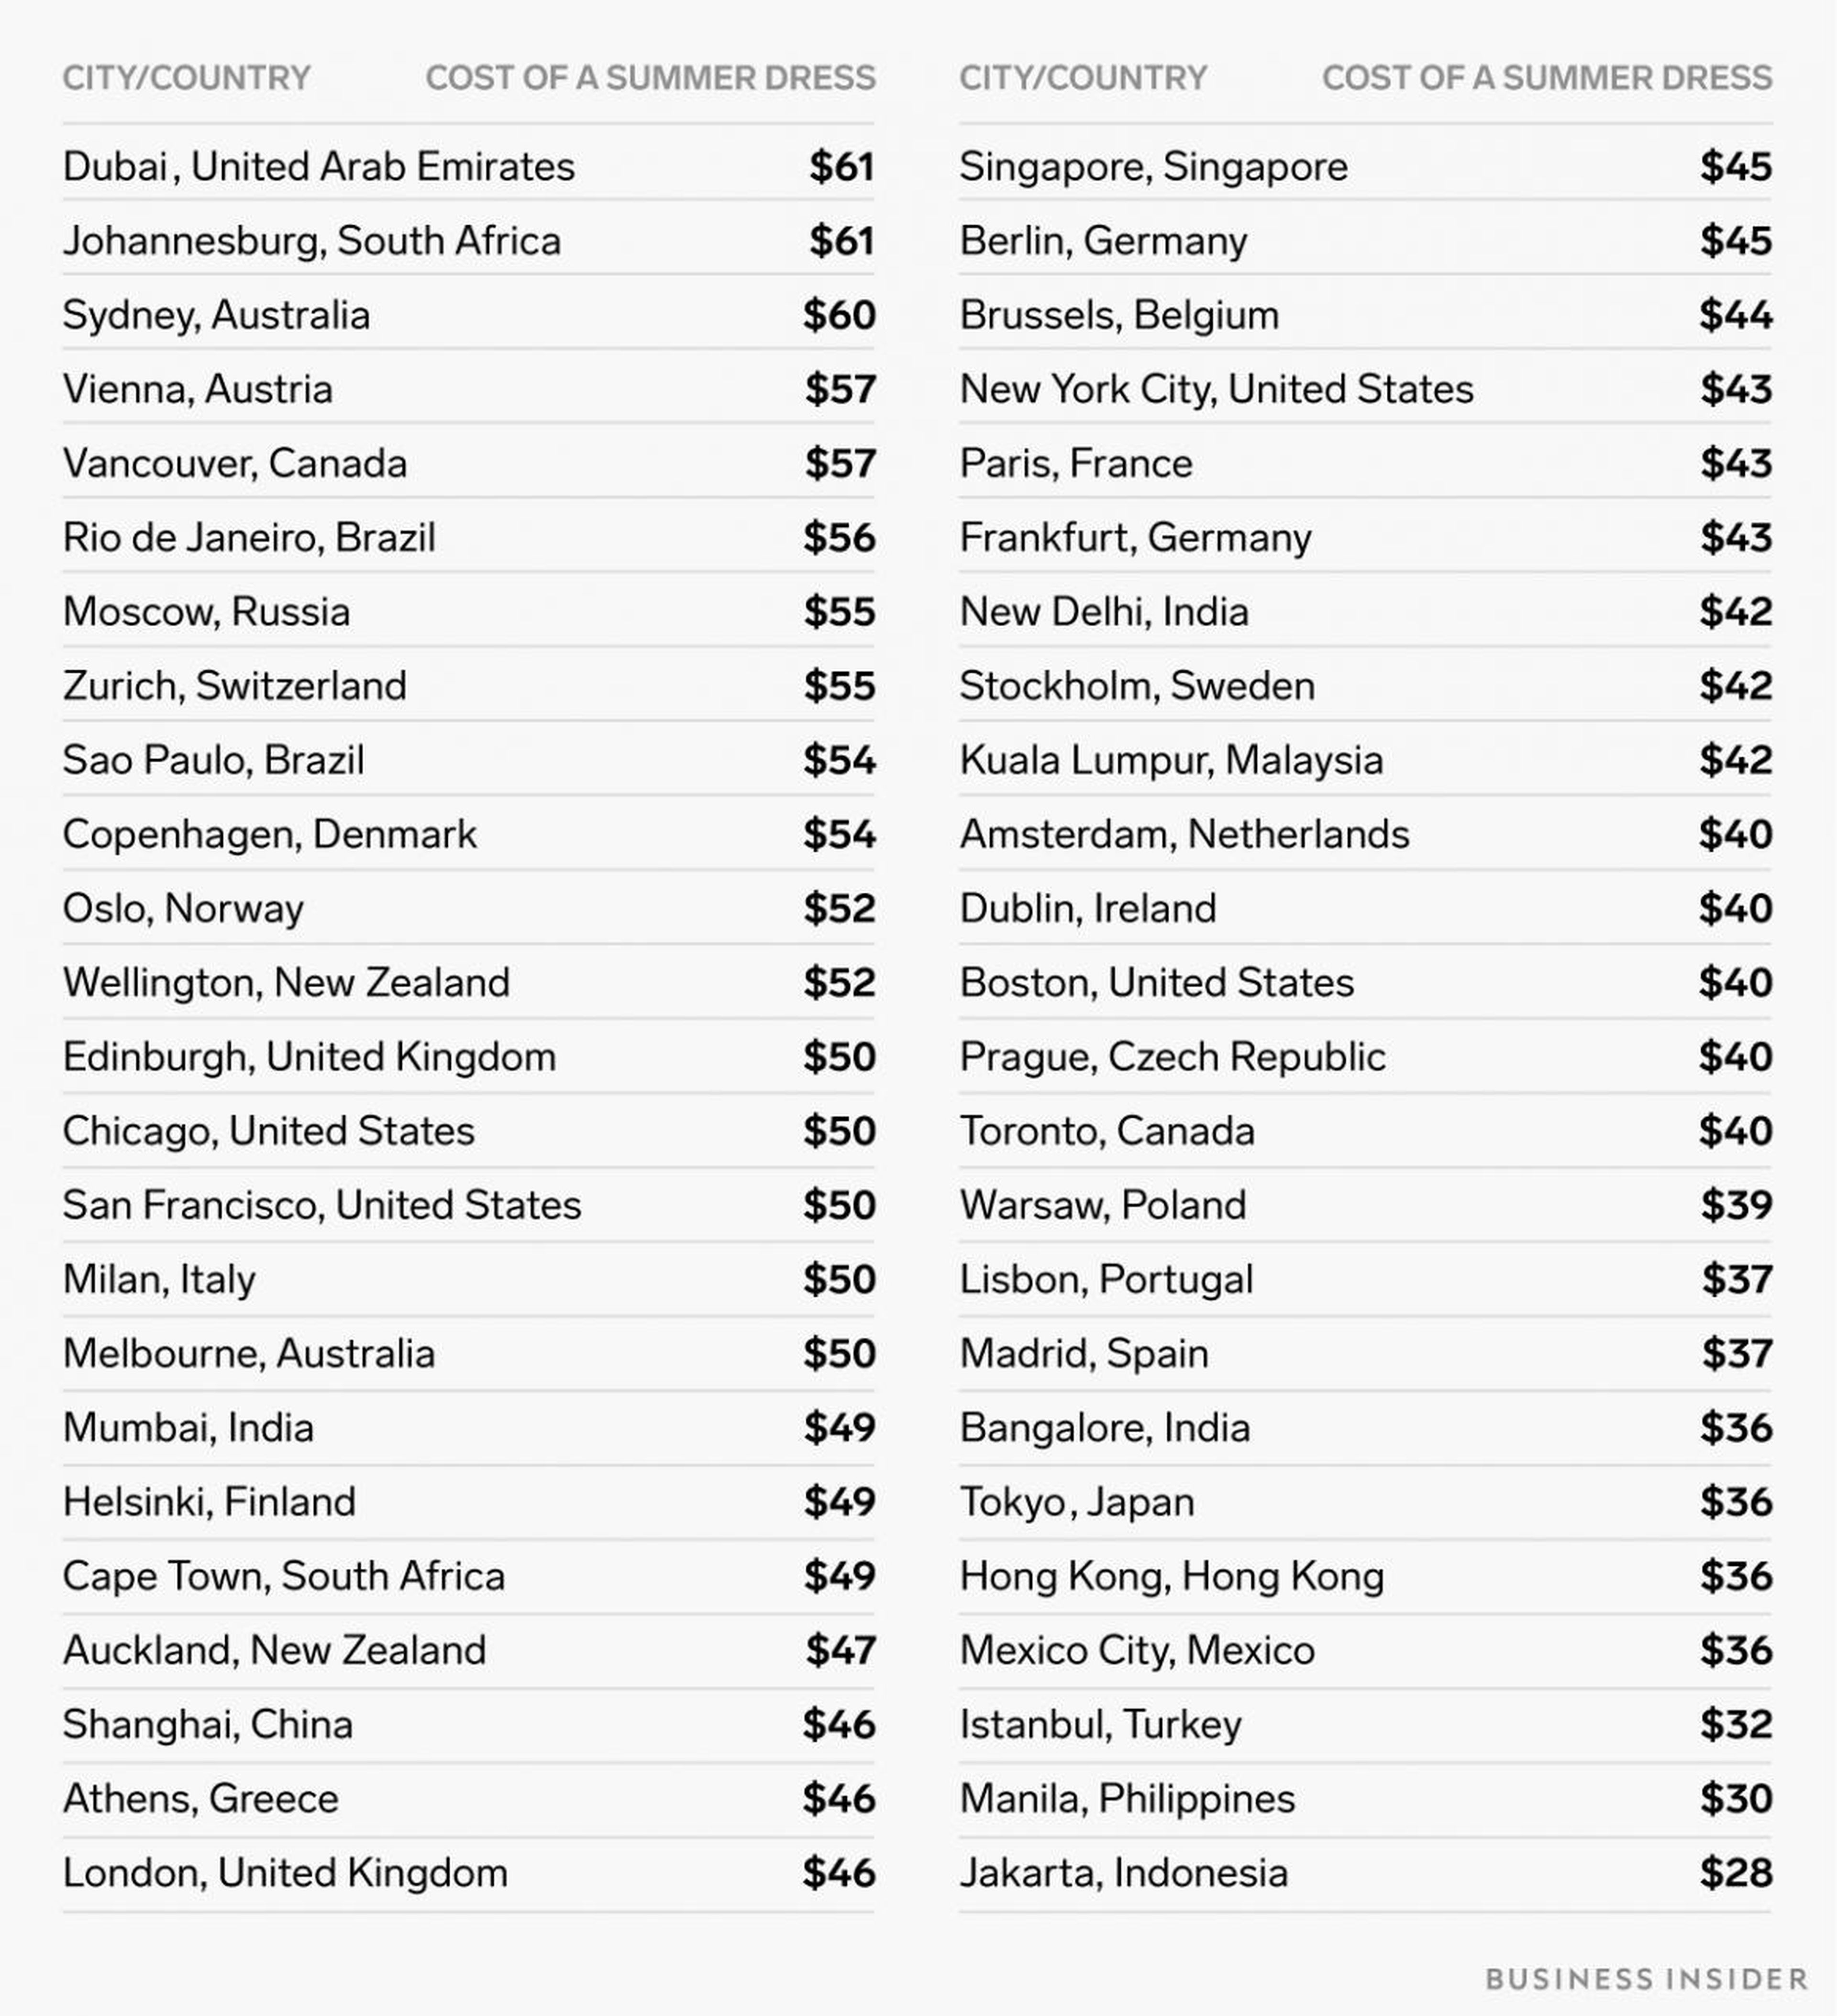 Dubai is the most expensive place to buy a dress.